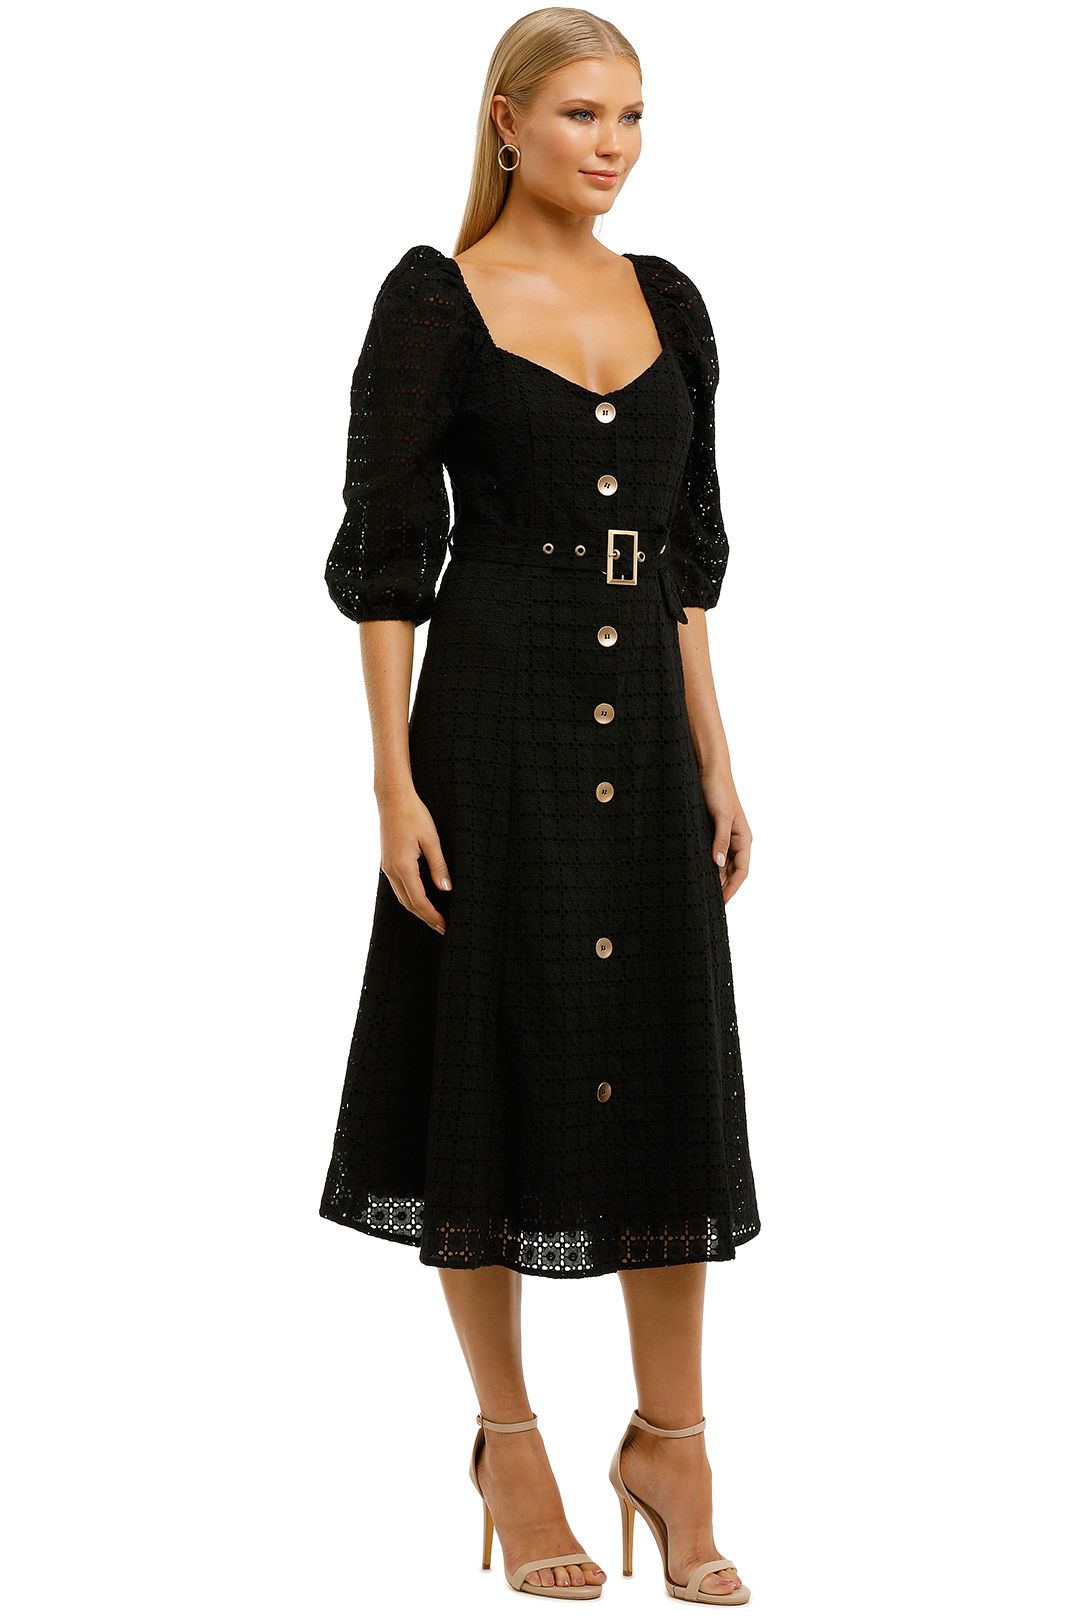 We-Are-Kindred-Vienna-Midi-Dress-Noir-Side